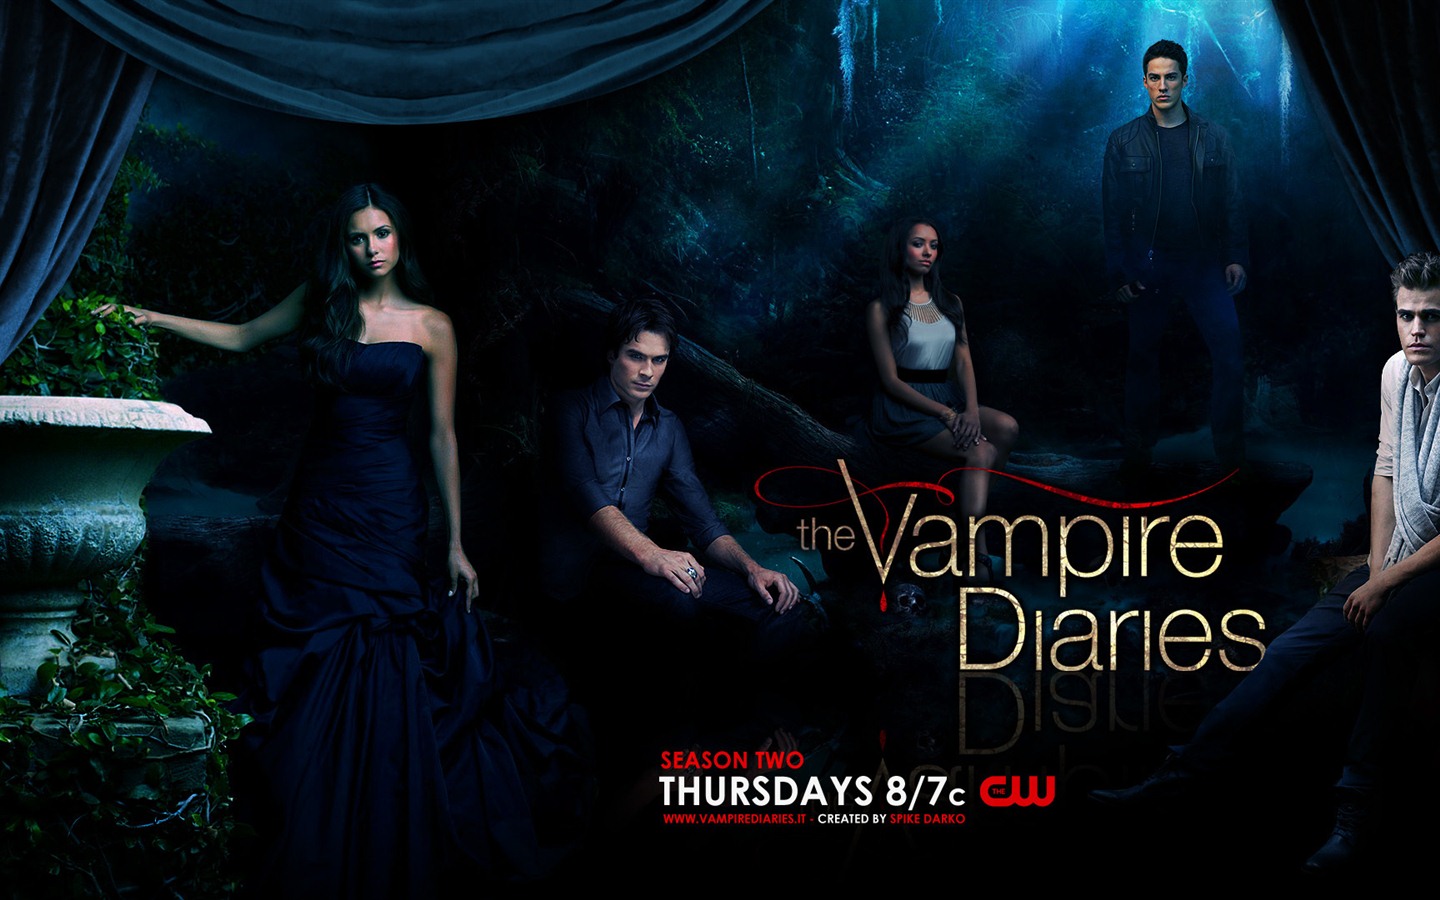 The Vampire Diaries wallpapers HD #18 - 1440x900